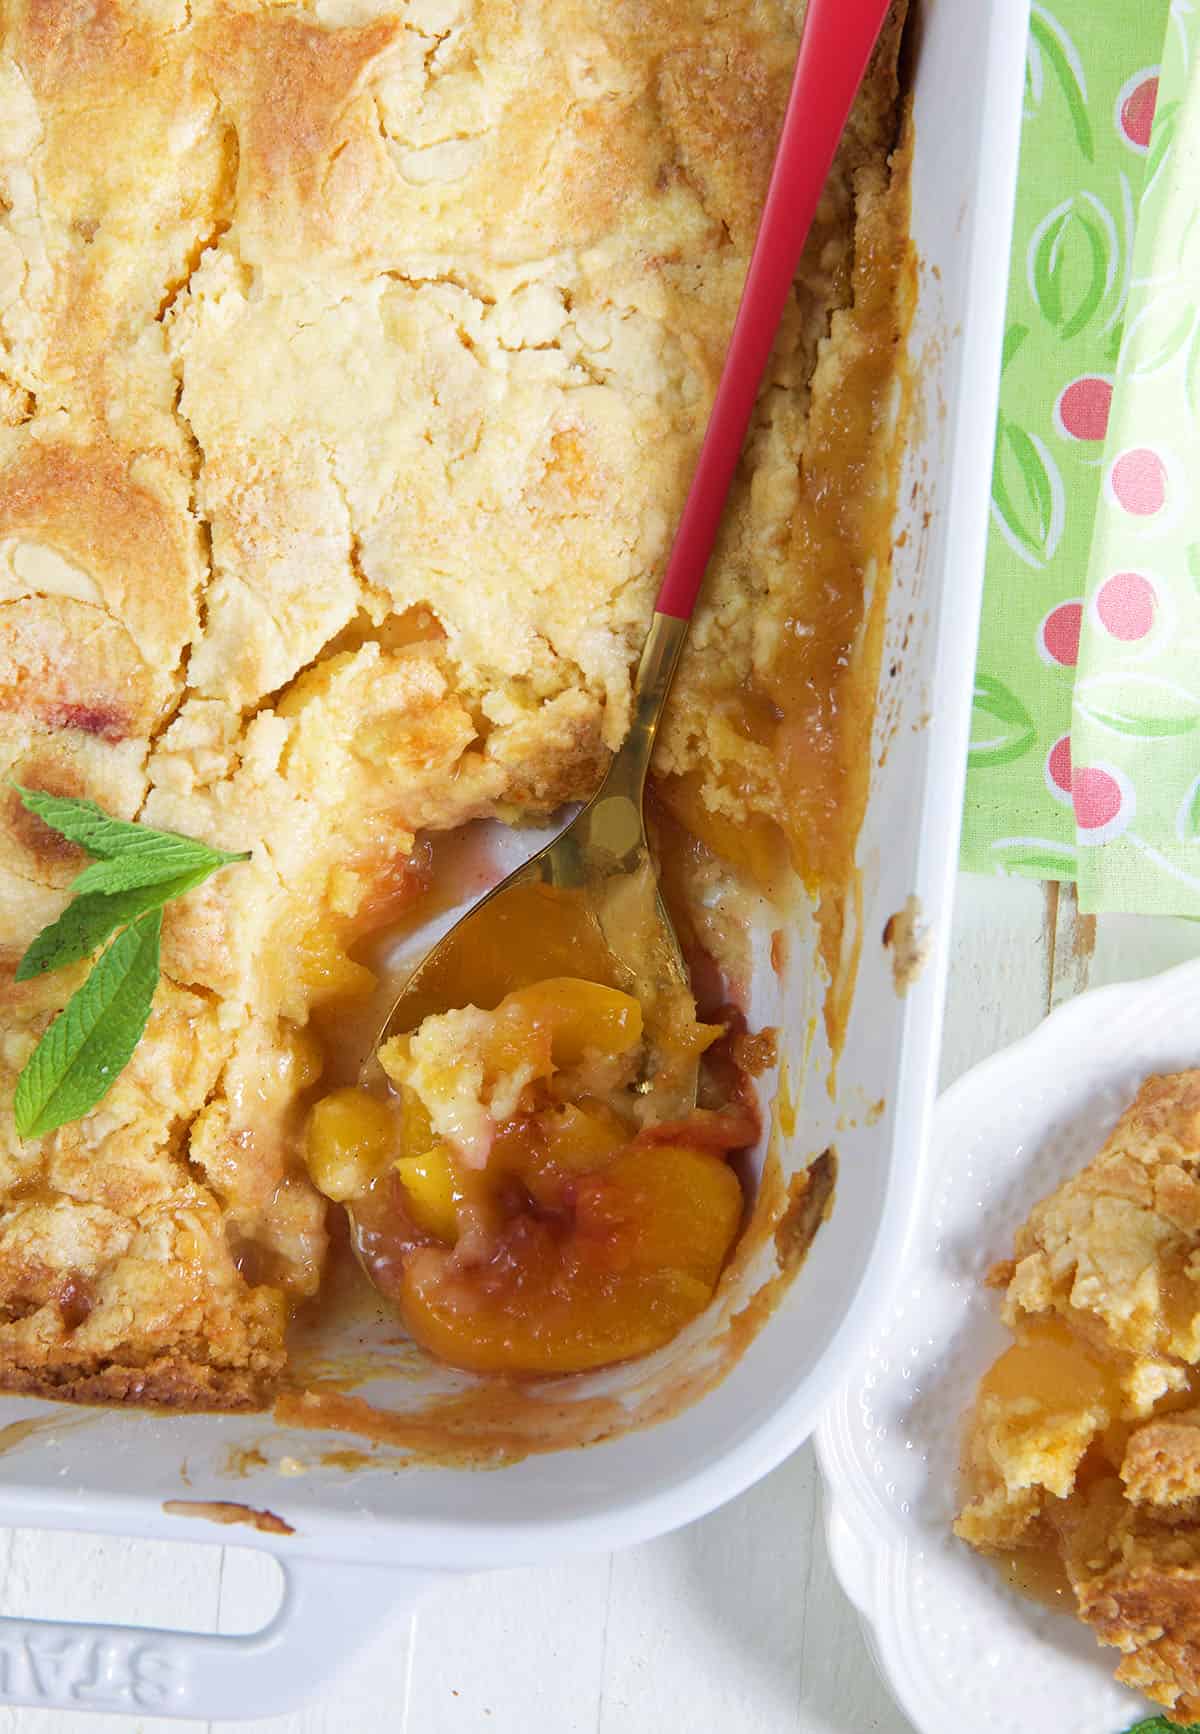 A large spoon is digging into a corner of the peach dump cake.